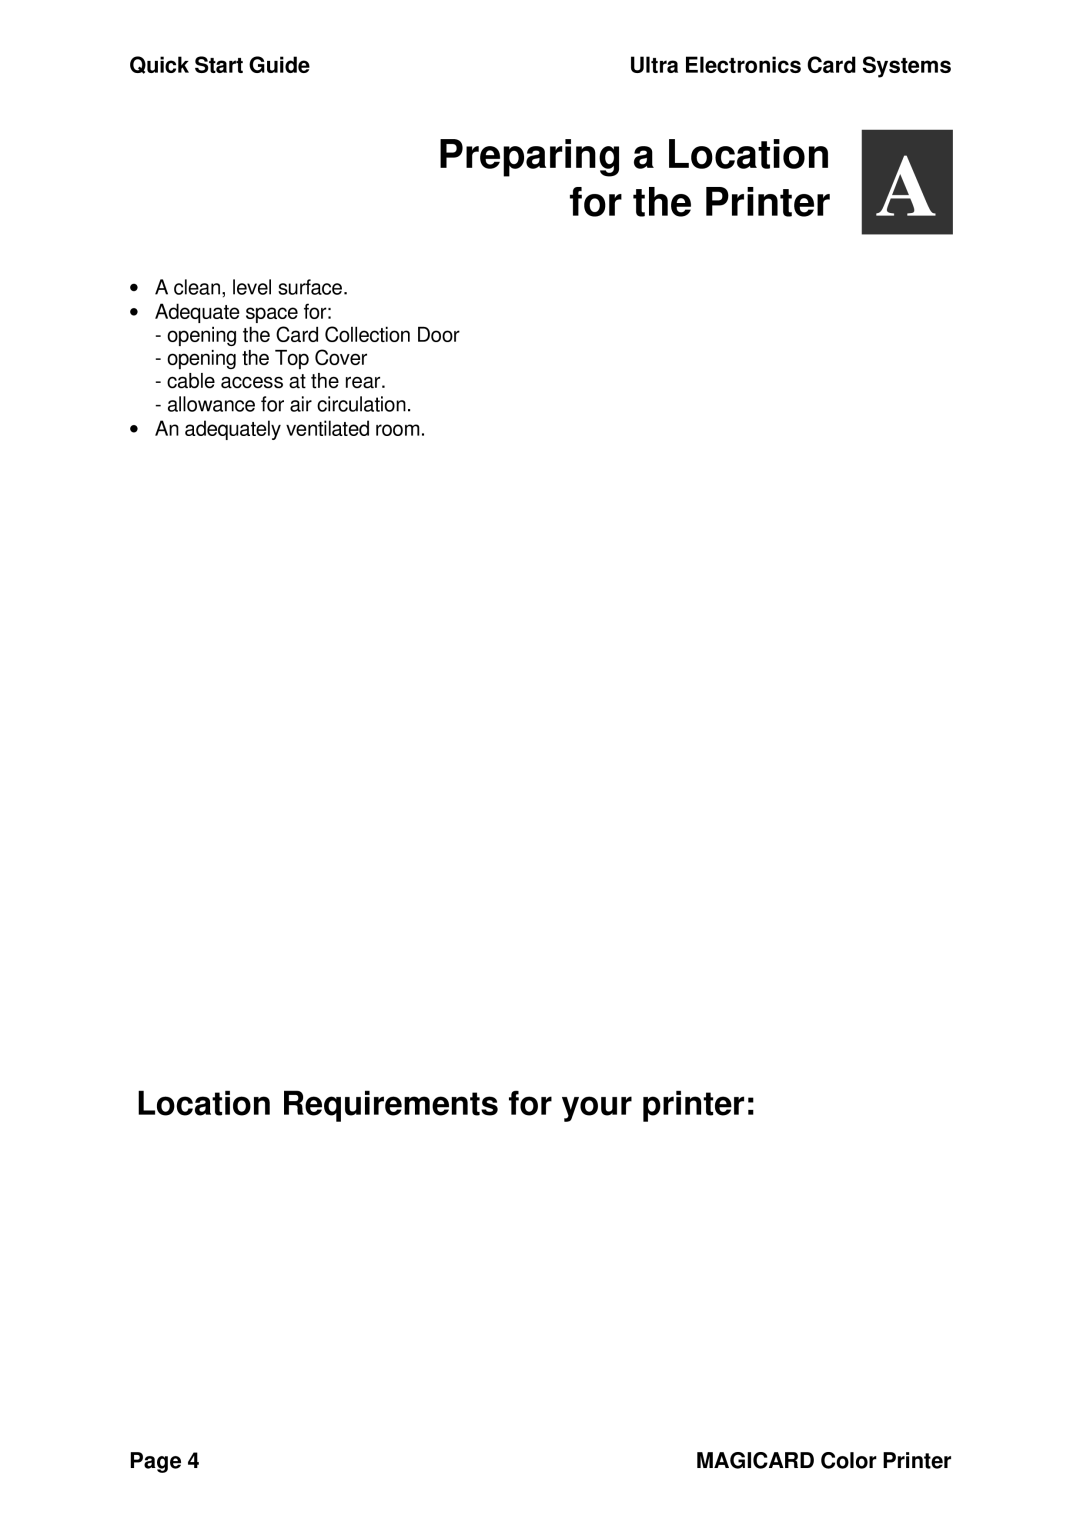 Ultra electronic 300plus quick start Preparing a Location For the Printer, Location Requirements for your printer 